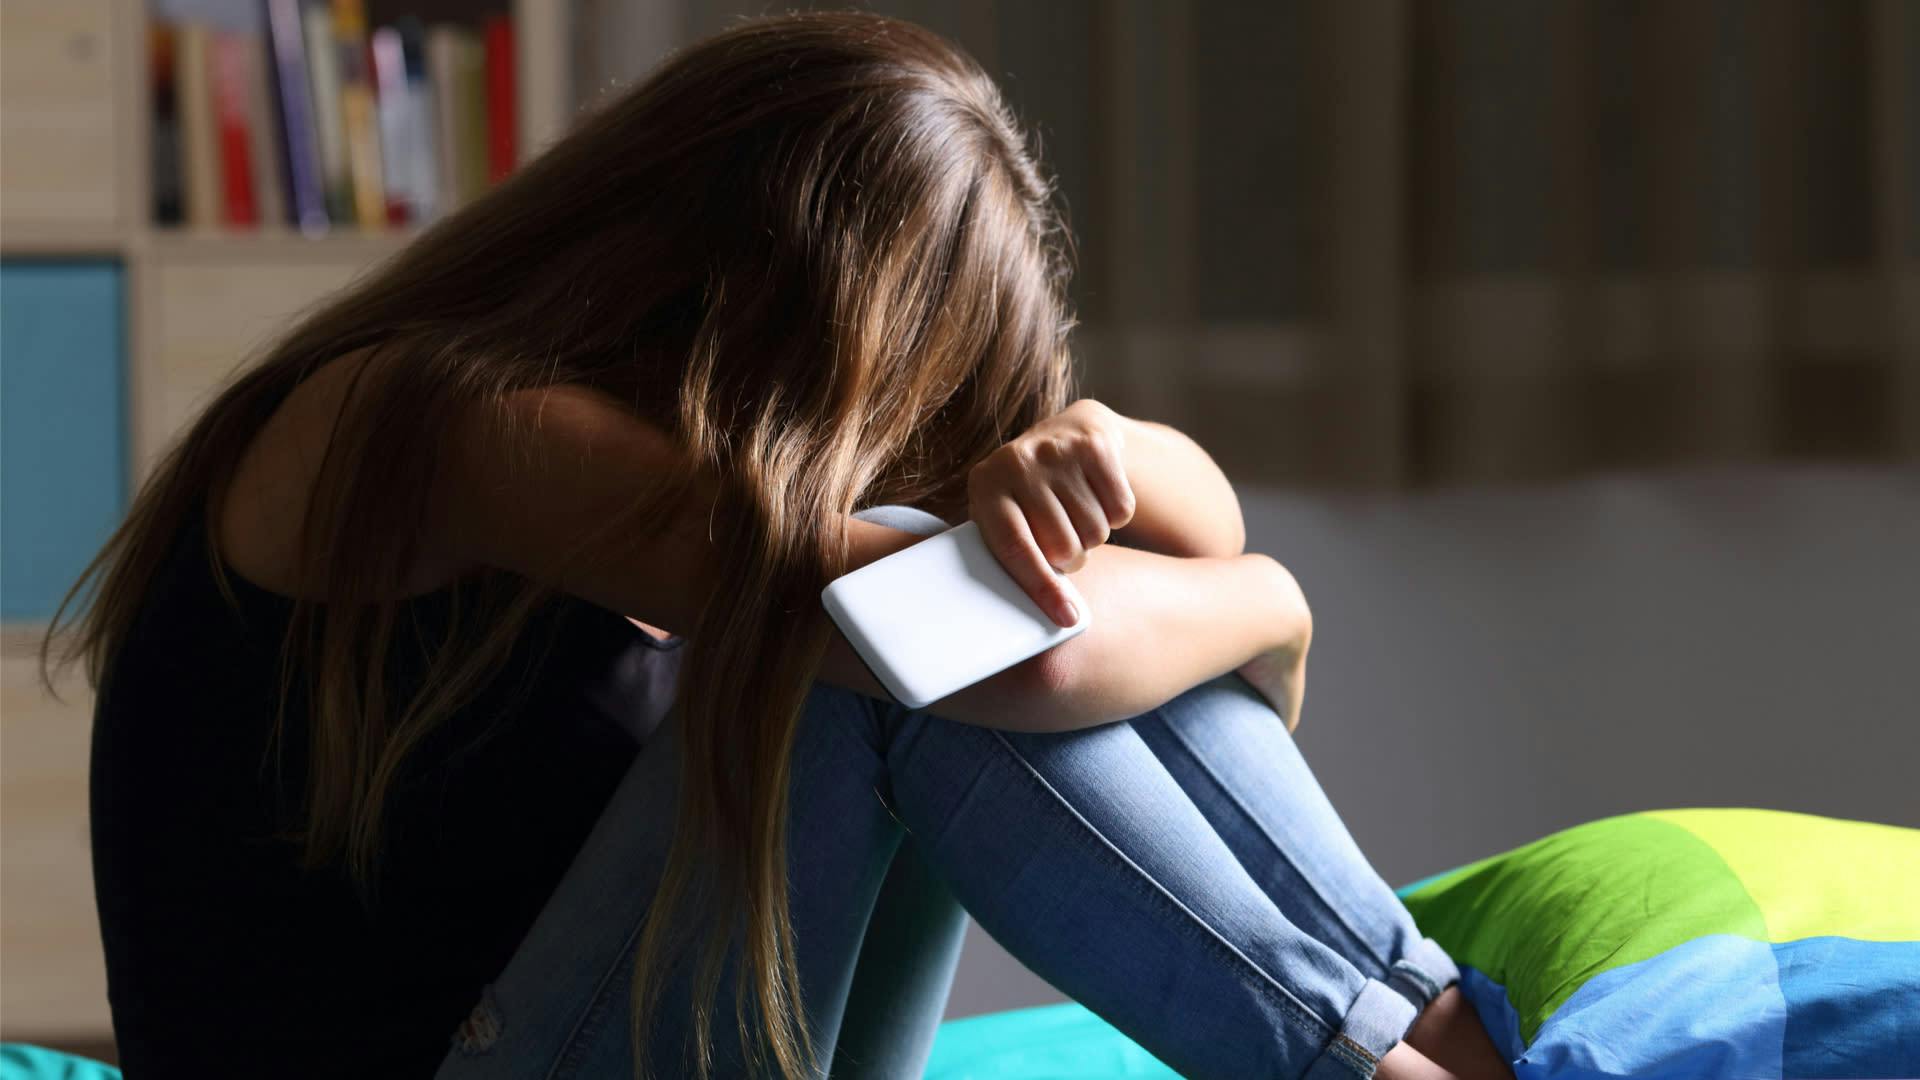 Girl is upset with mobile phone in her hand after suffering from cyber bullying